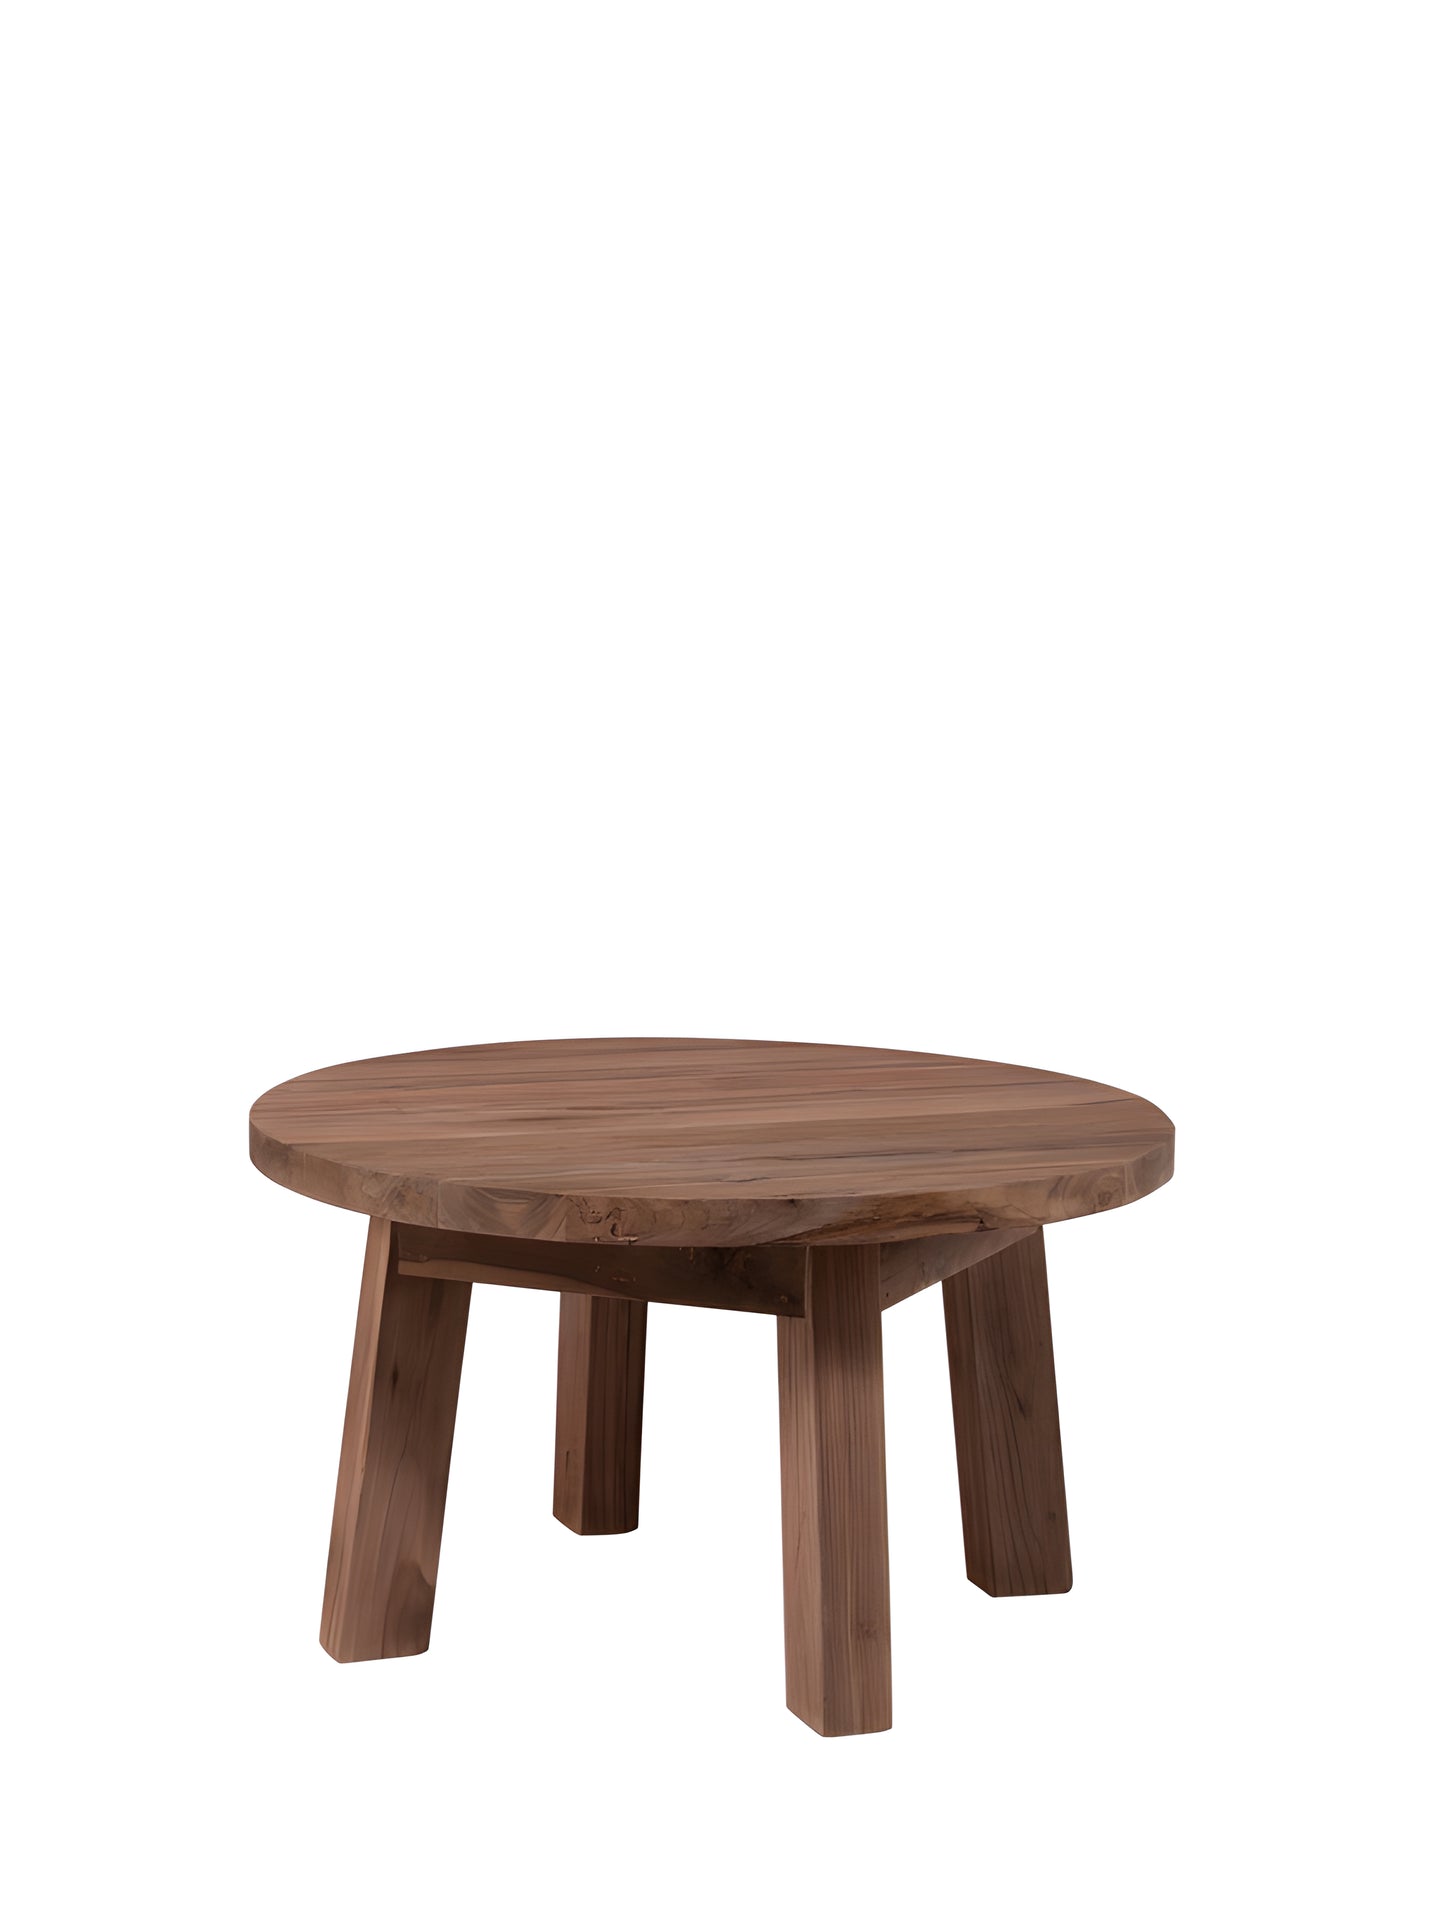 Pescara Reclaimed Teakwood Round Coffee Table front view by Mellowdays Furniture